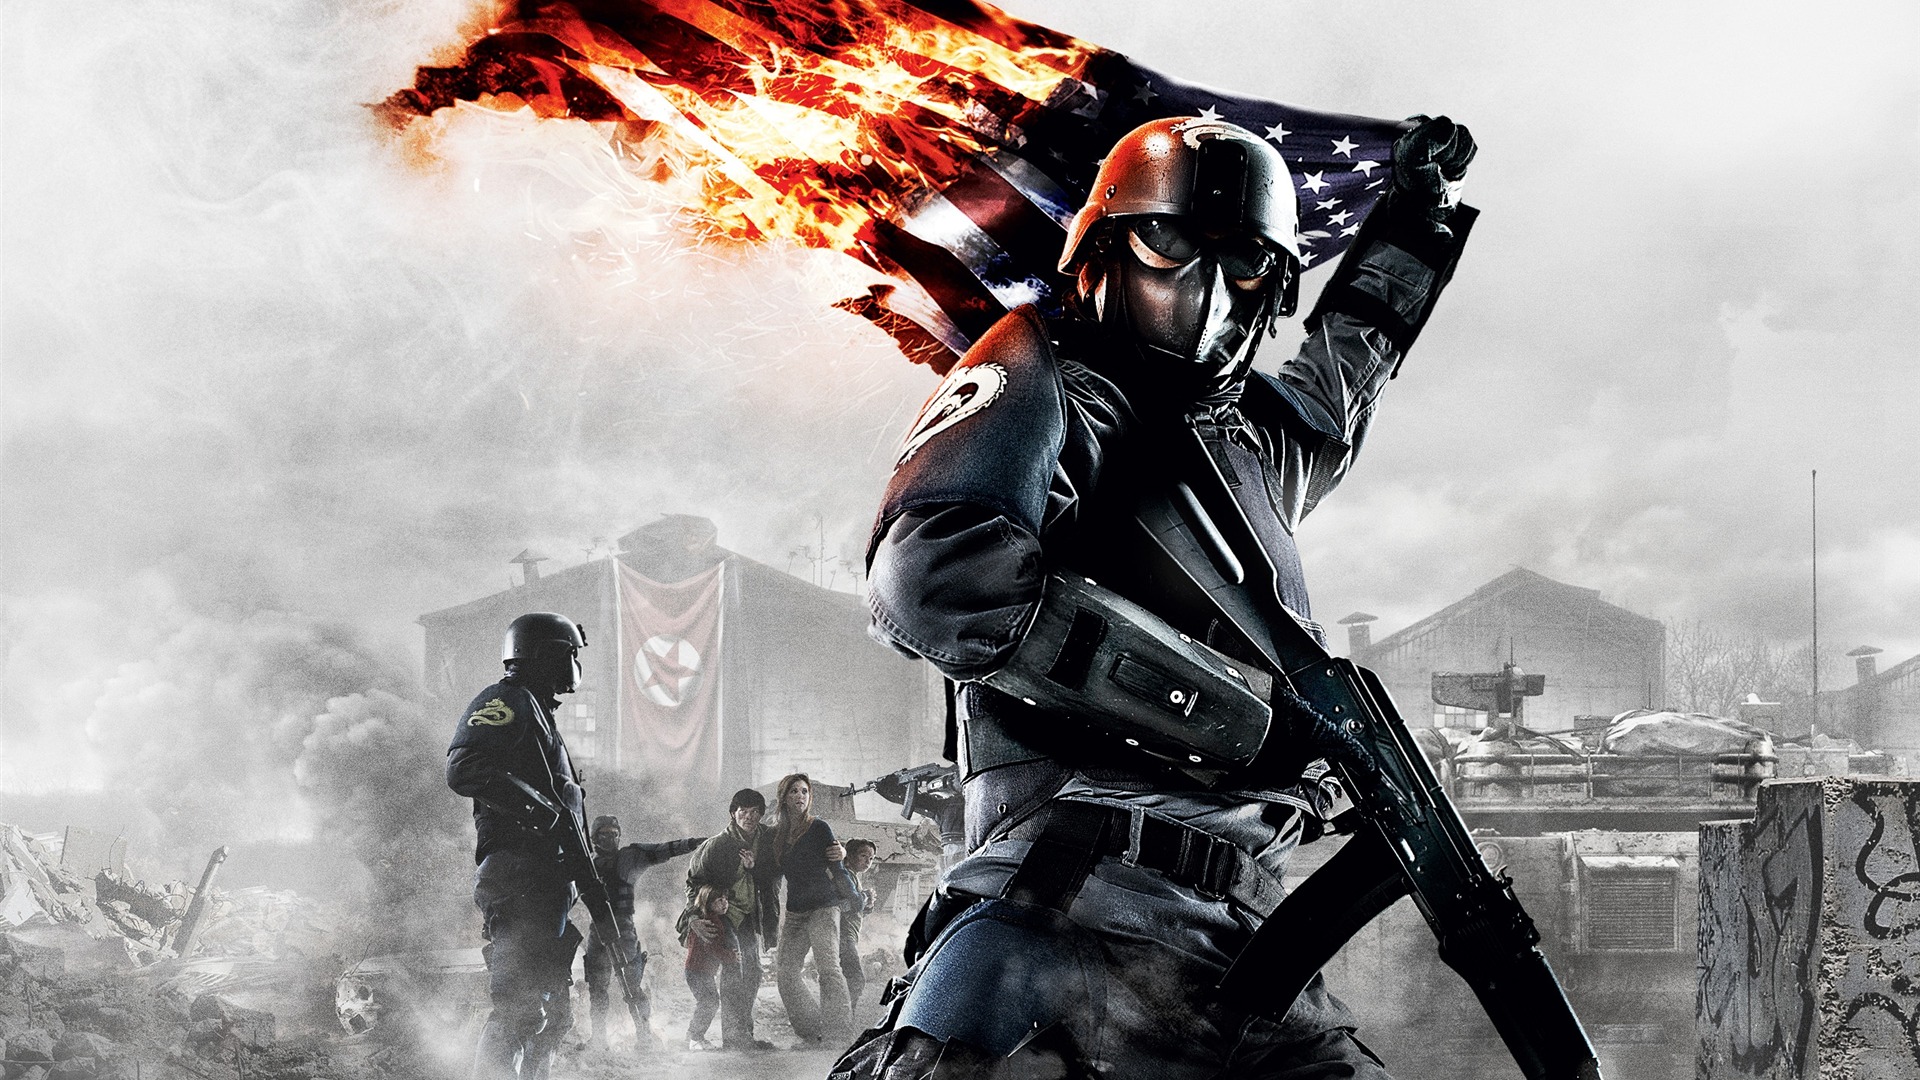 Homefront HD Wallpapers #11 - 1920x1080